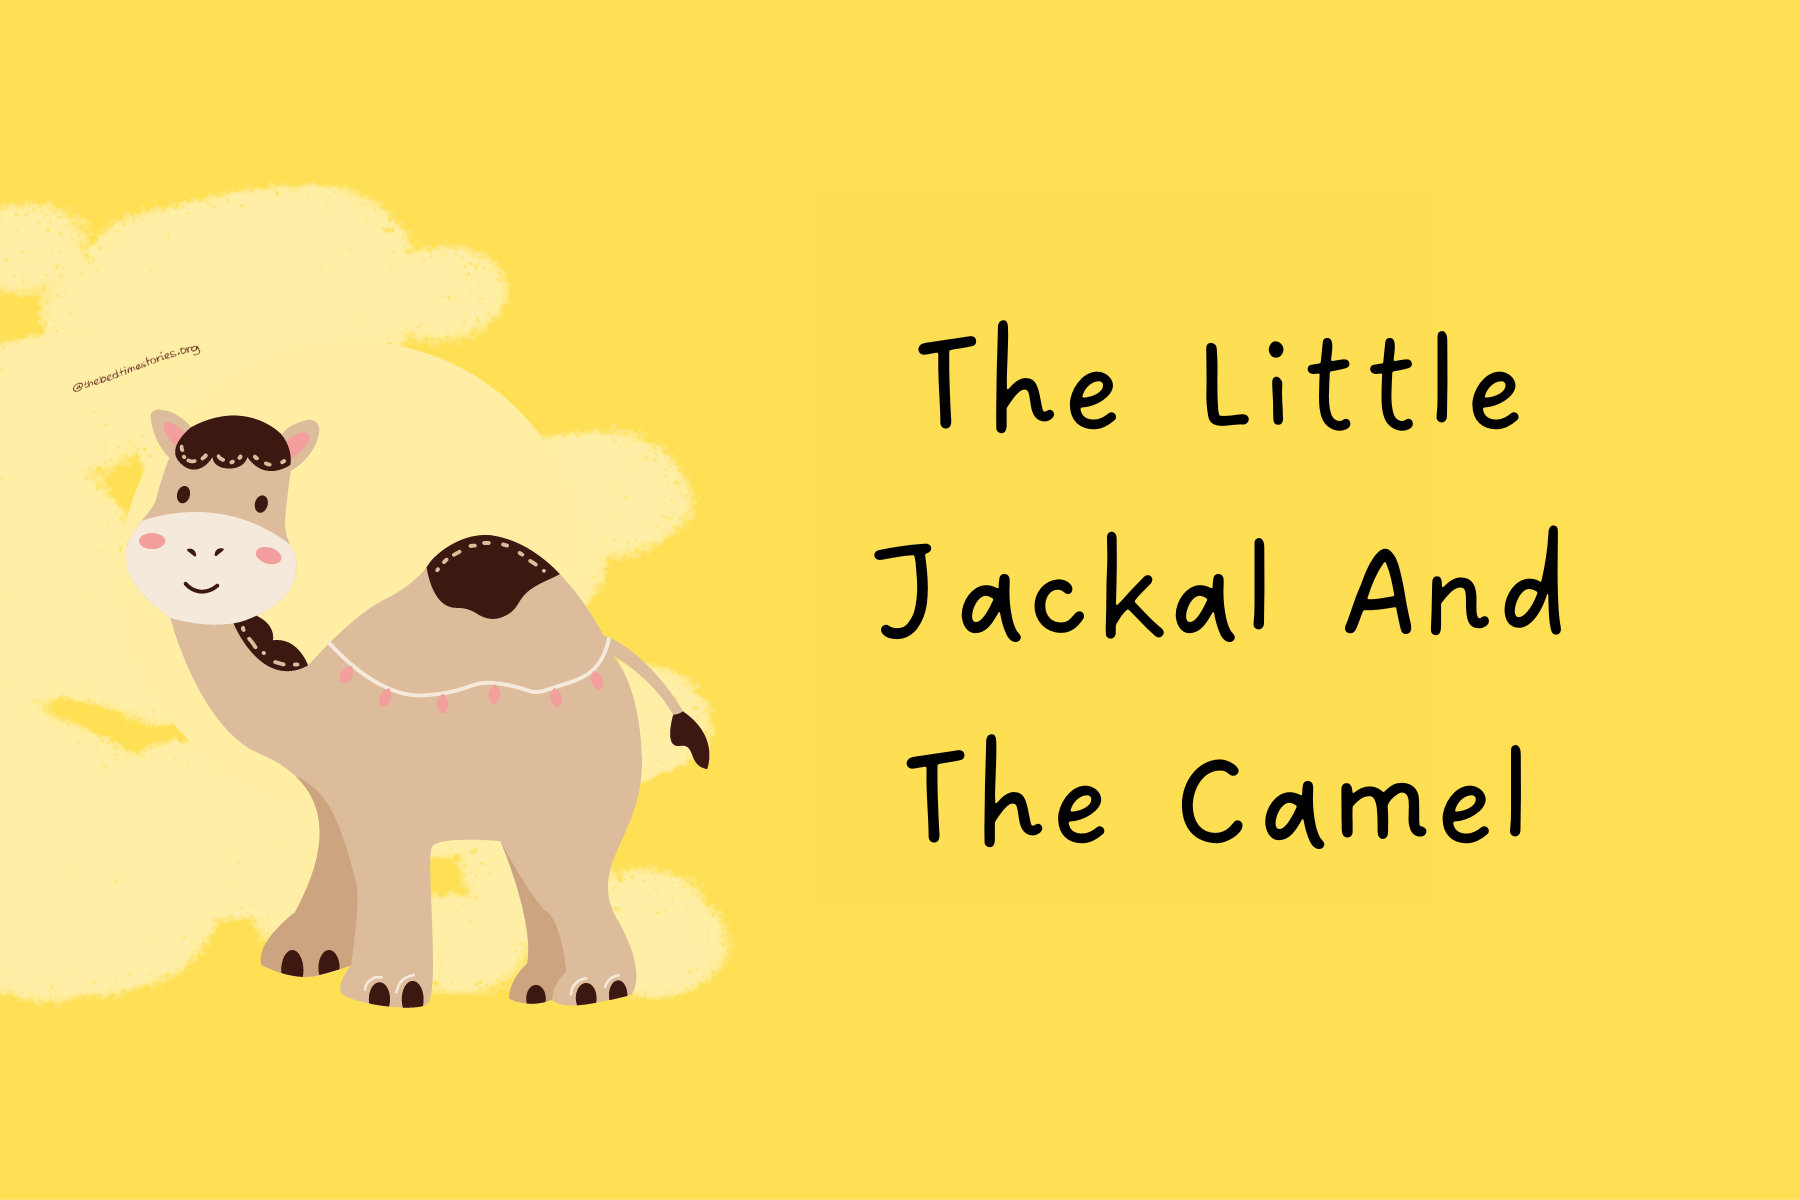 The Little Jackal And the Camel